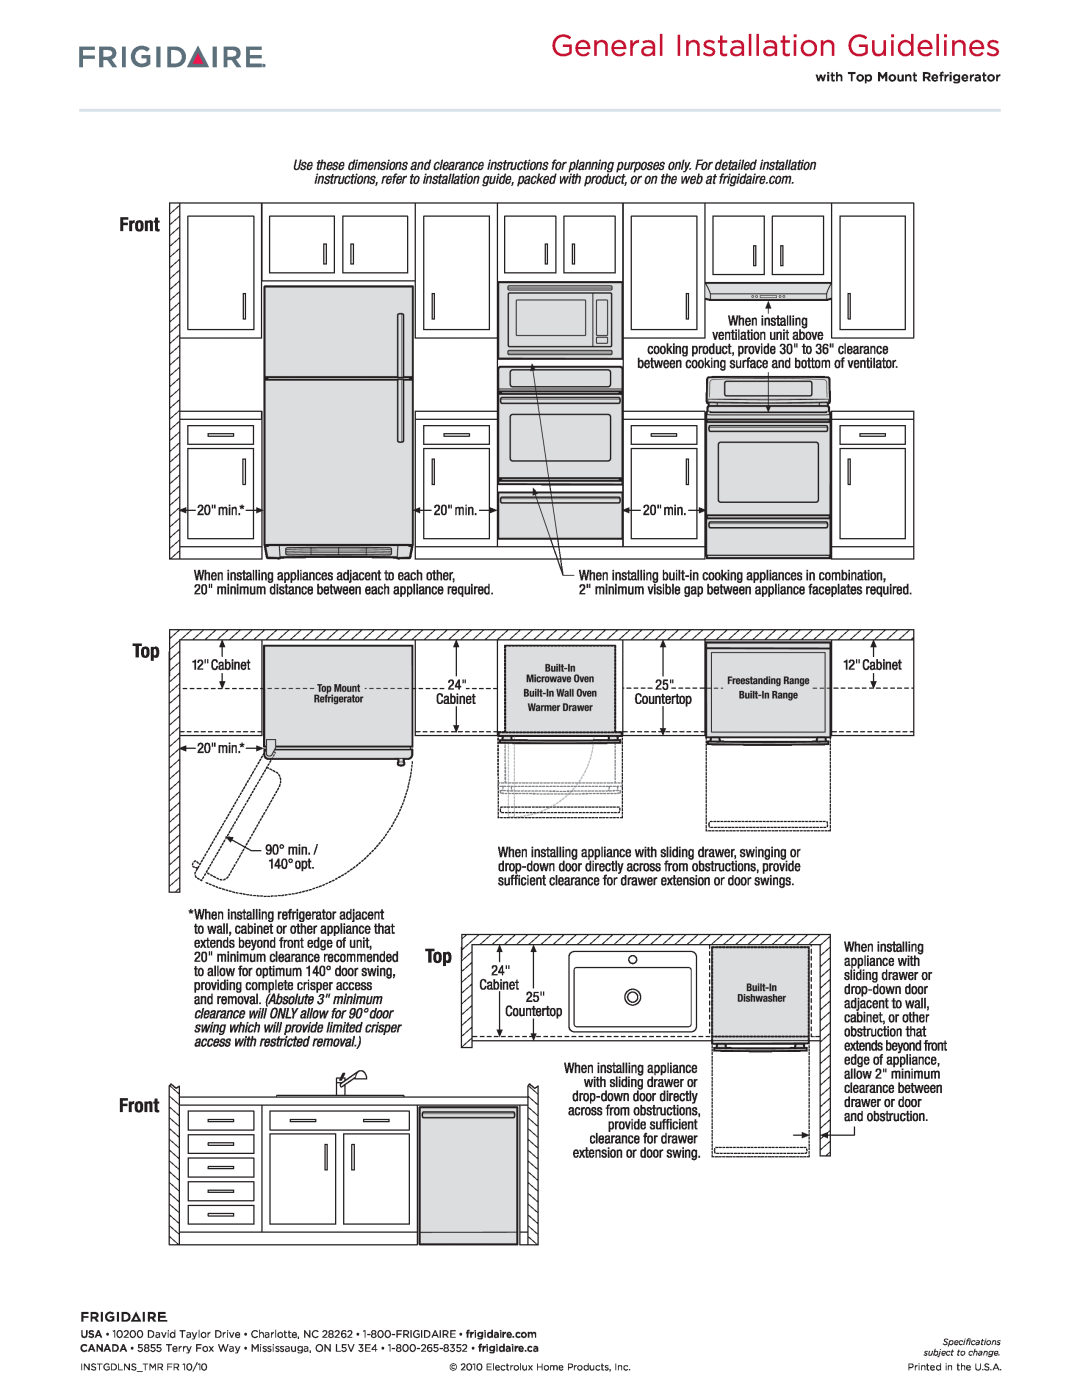 Frigidaire FPGF3081K F General Installation Guidelines, Top Front, with Top Mount Refrigerator, INSTGDLNS TMR FR 10/10 